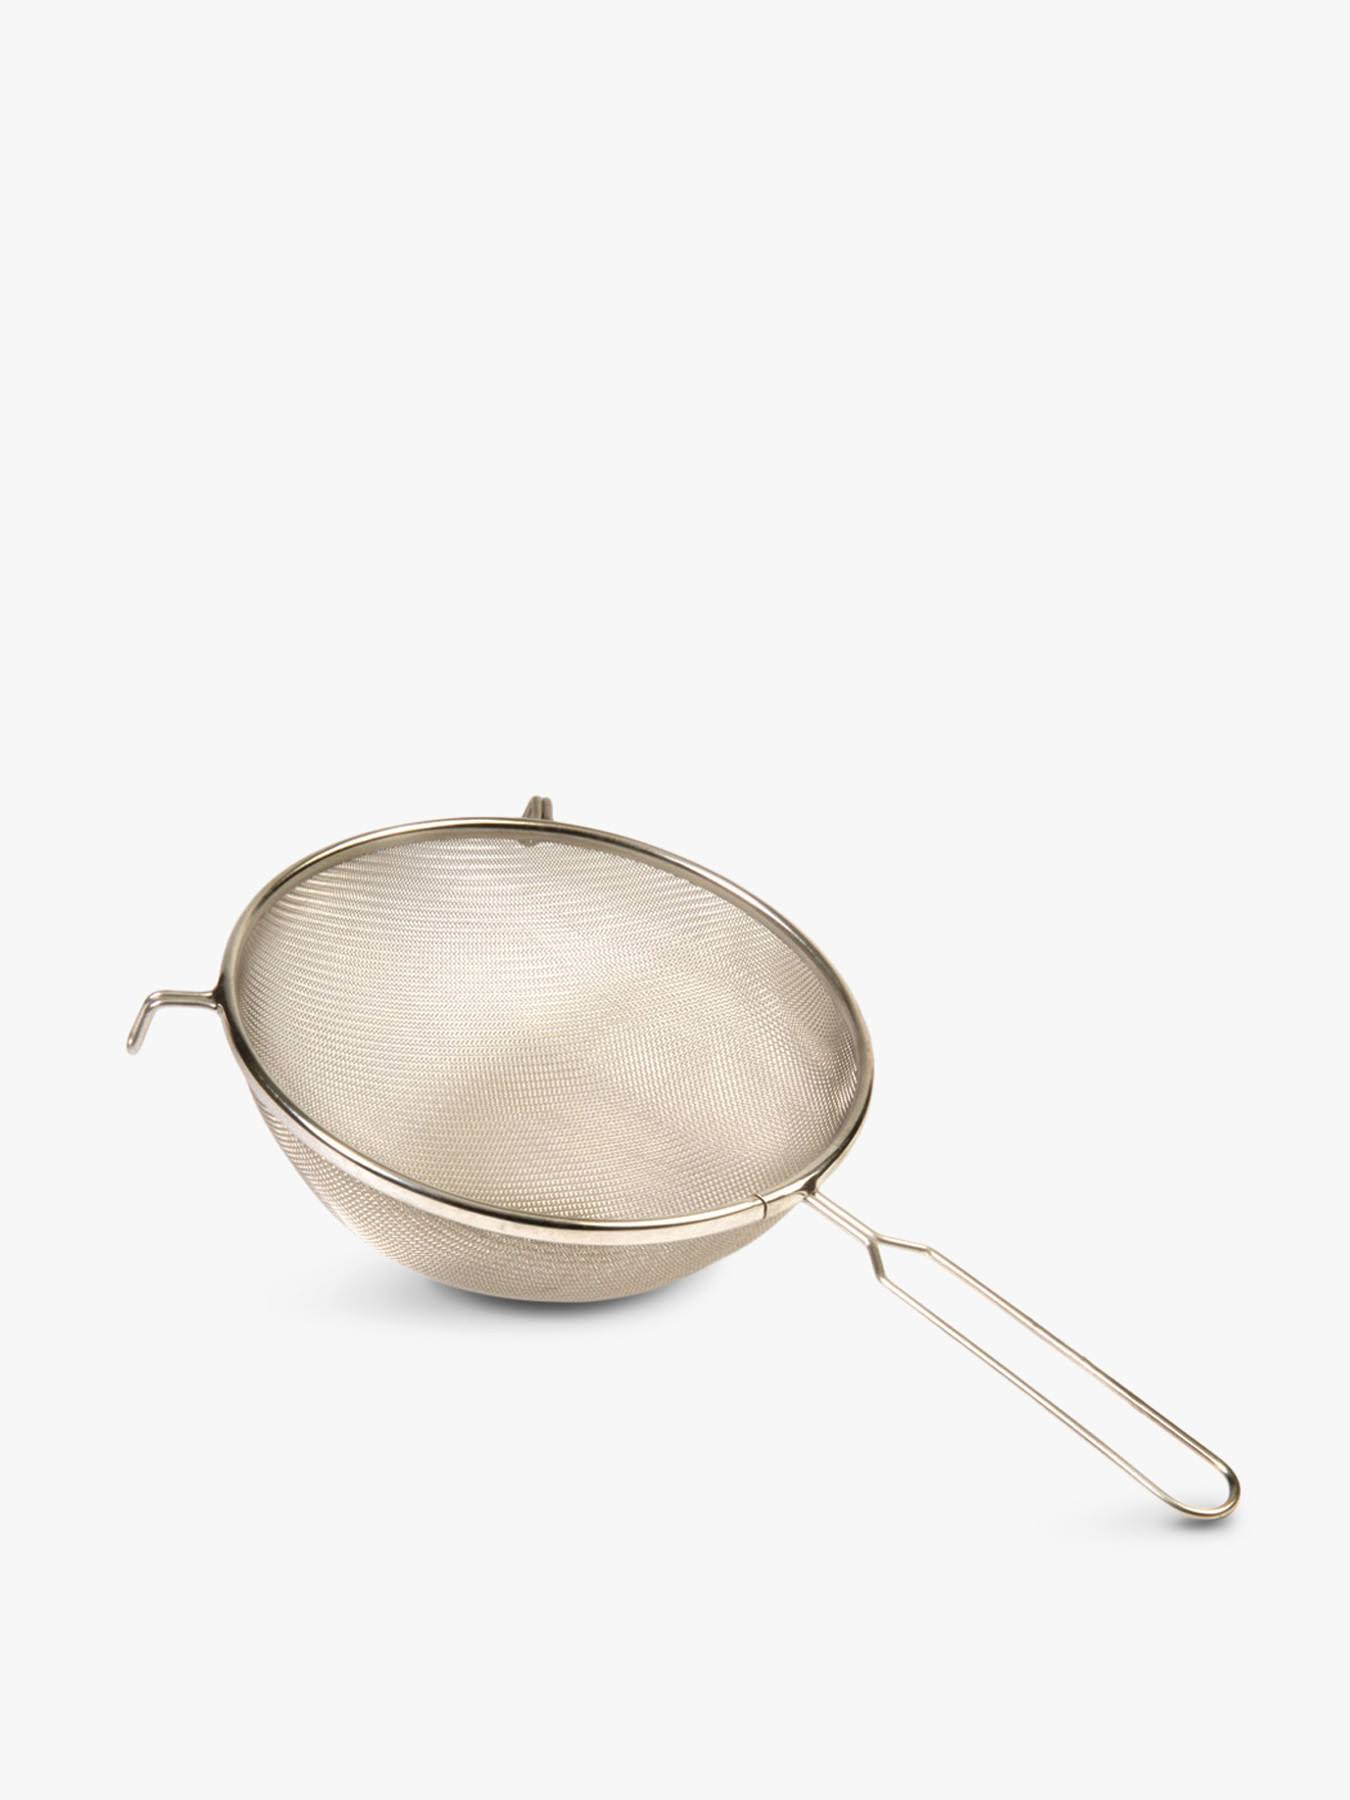 Browne Stainless Steel Sieve 20cm - AfterPay & zipPay Available